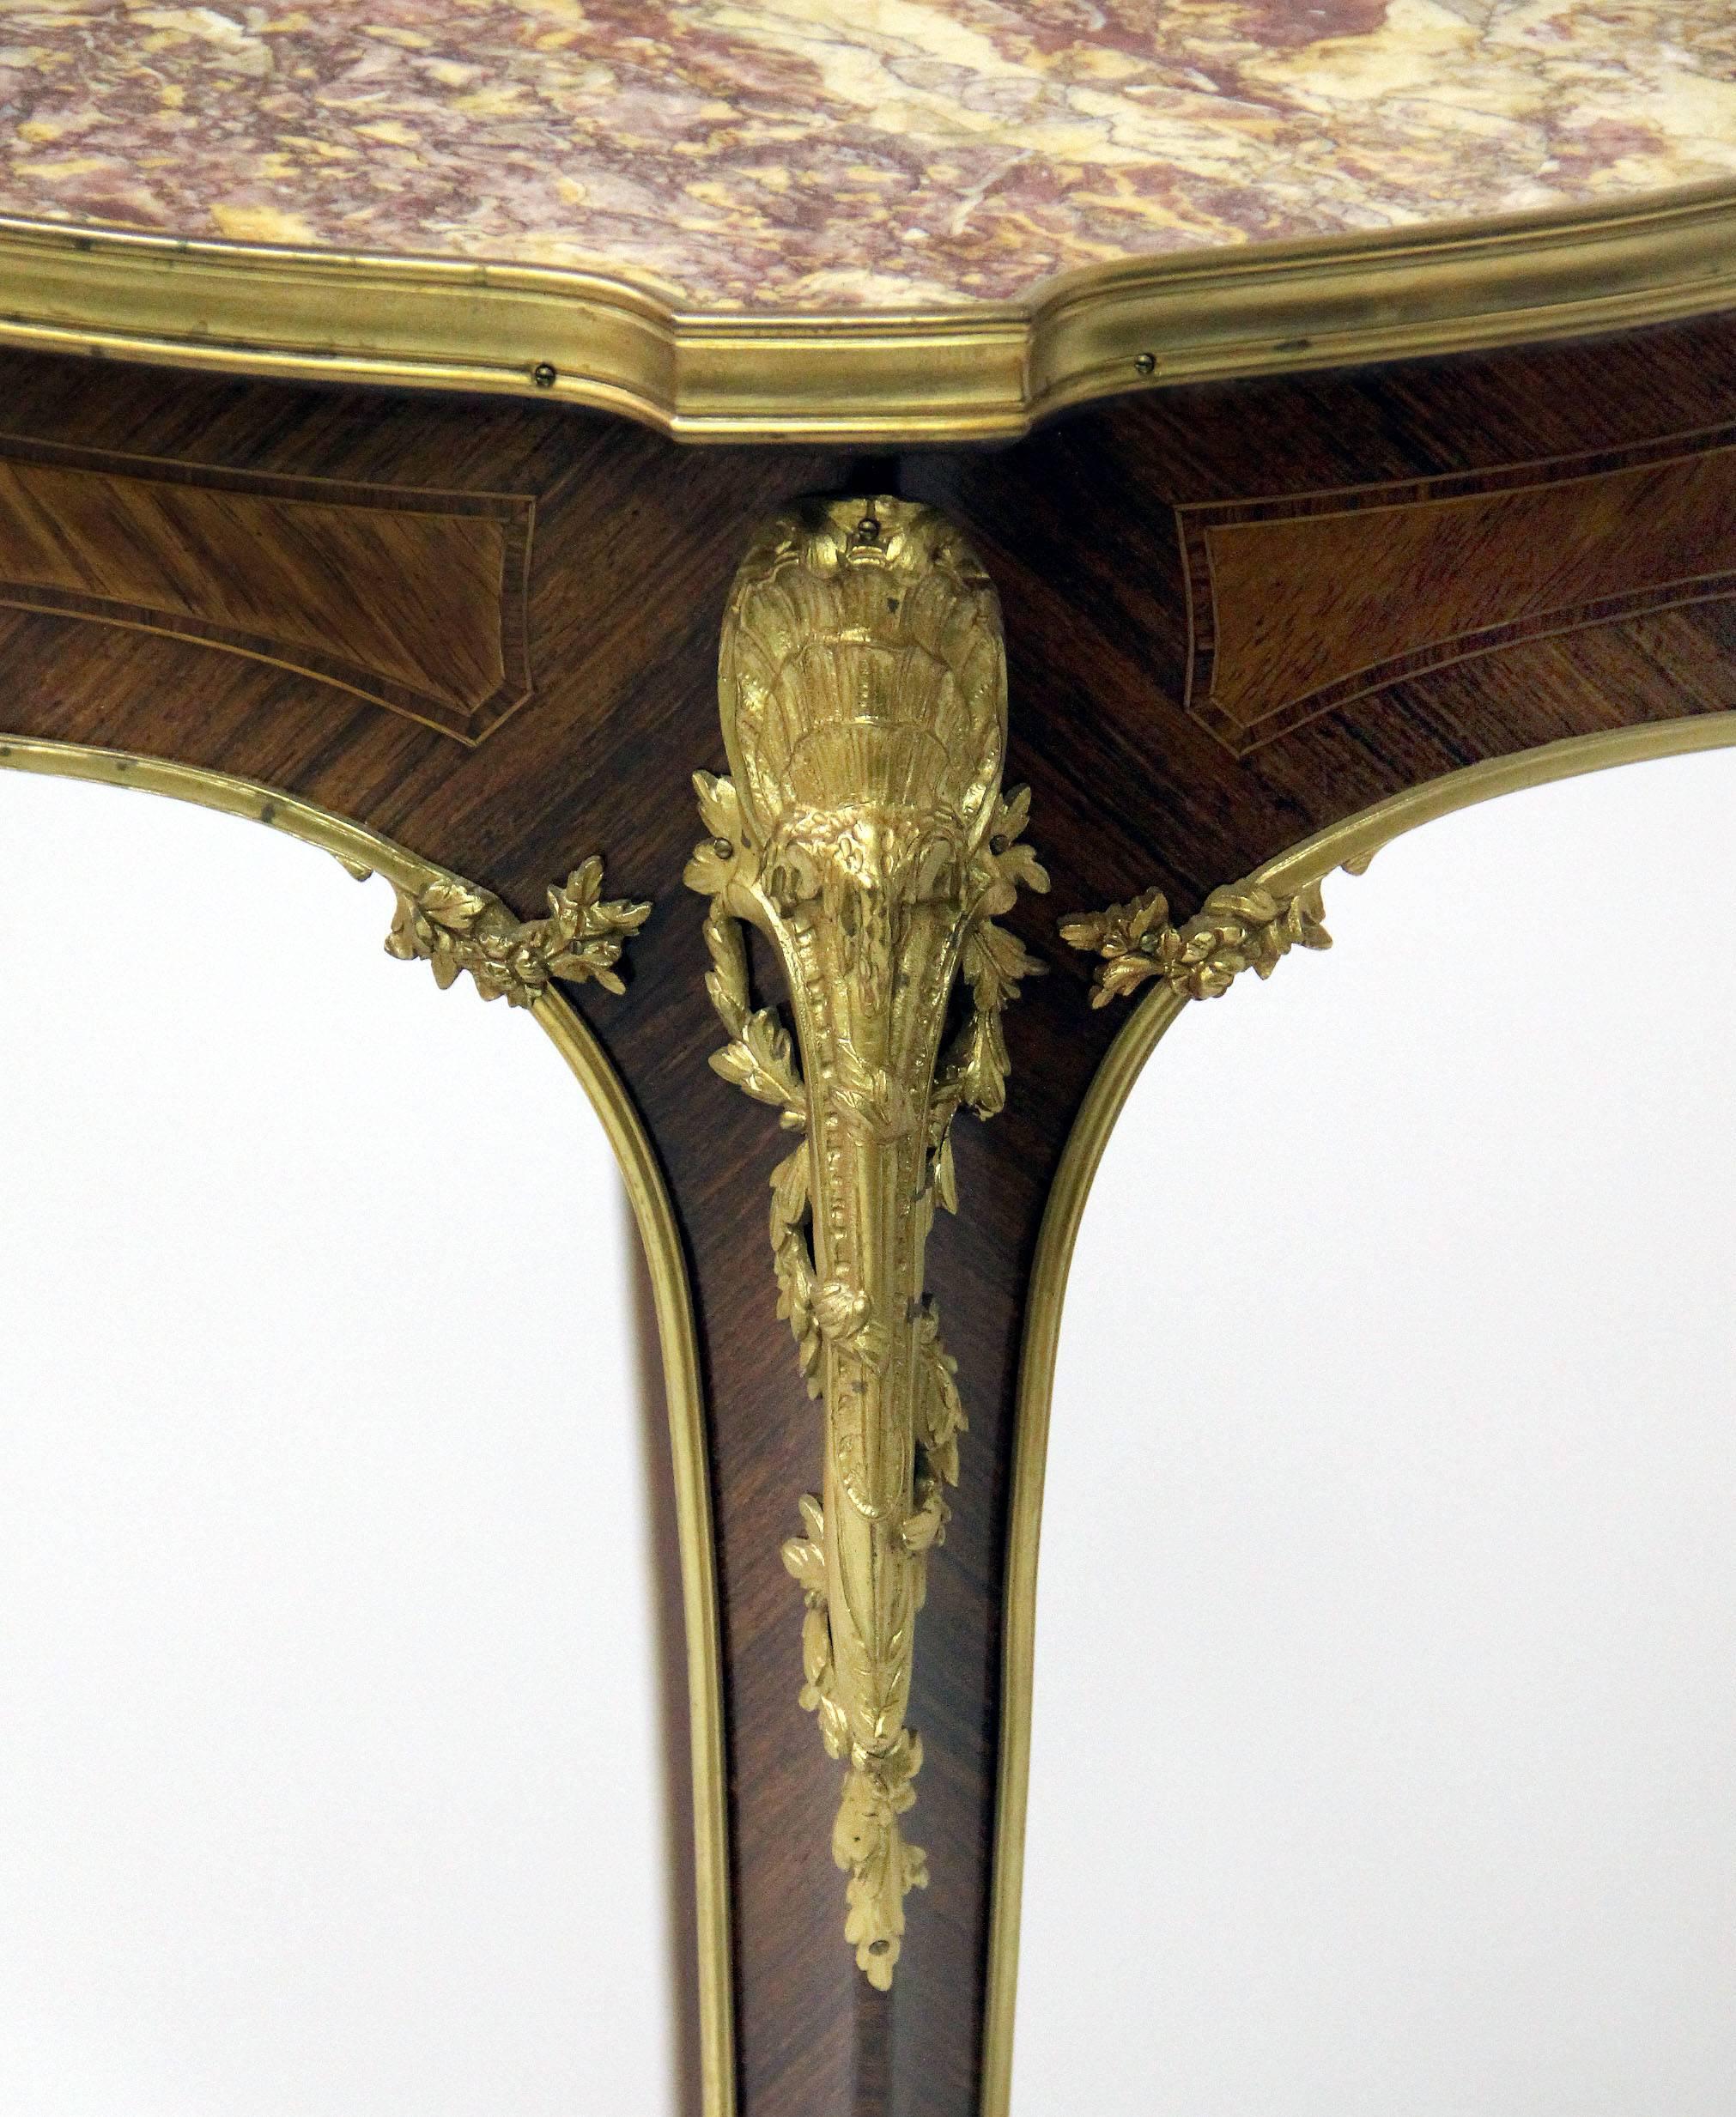 A wonderful late 19th century gilt bronze mounted Louis XV style parquetry lamp table

By Kahn

The marble top over cabriole legs with bronze mounts of sea shells and flowers.

The underside of the carcass labelled E. Kahn Paris.

E. Kahn &